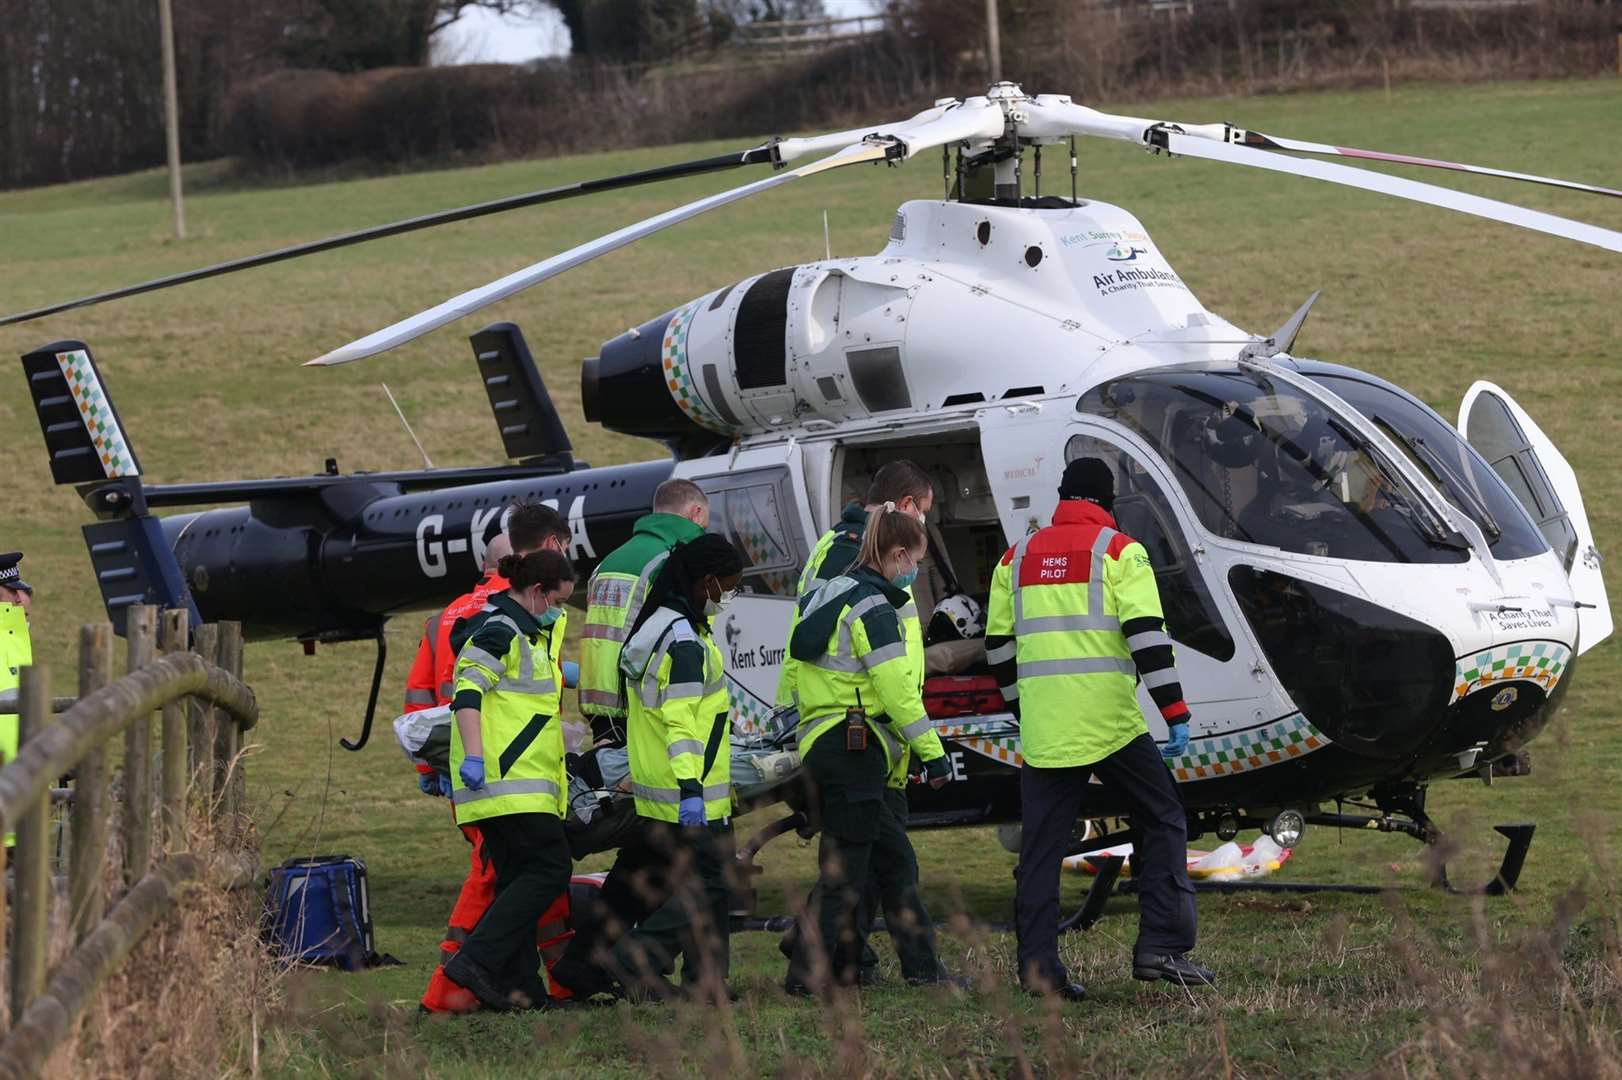 An air ambulance has attended the scene. Picture: UKNIP